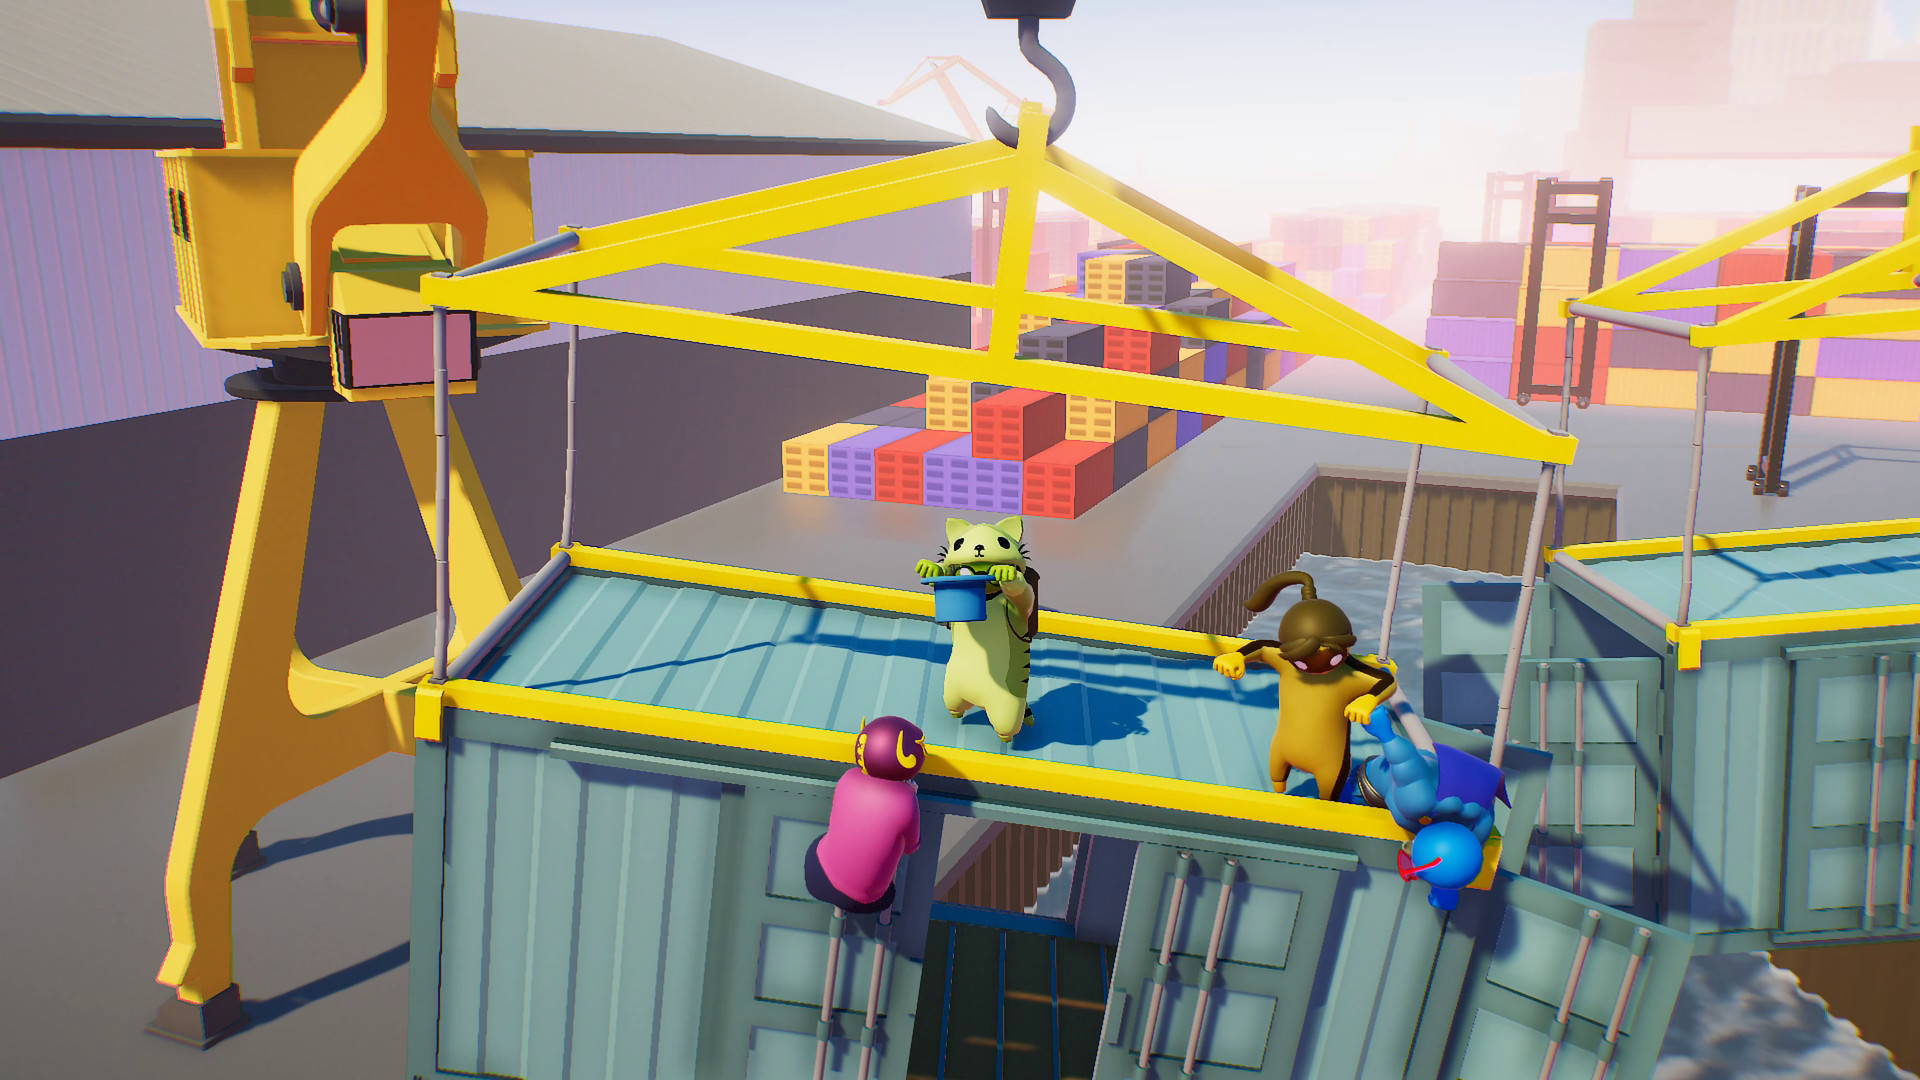 Gang Beasts on Steam